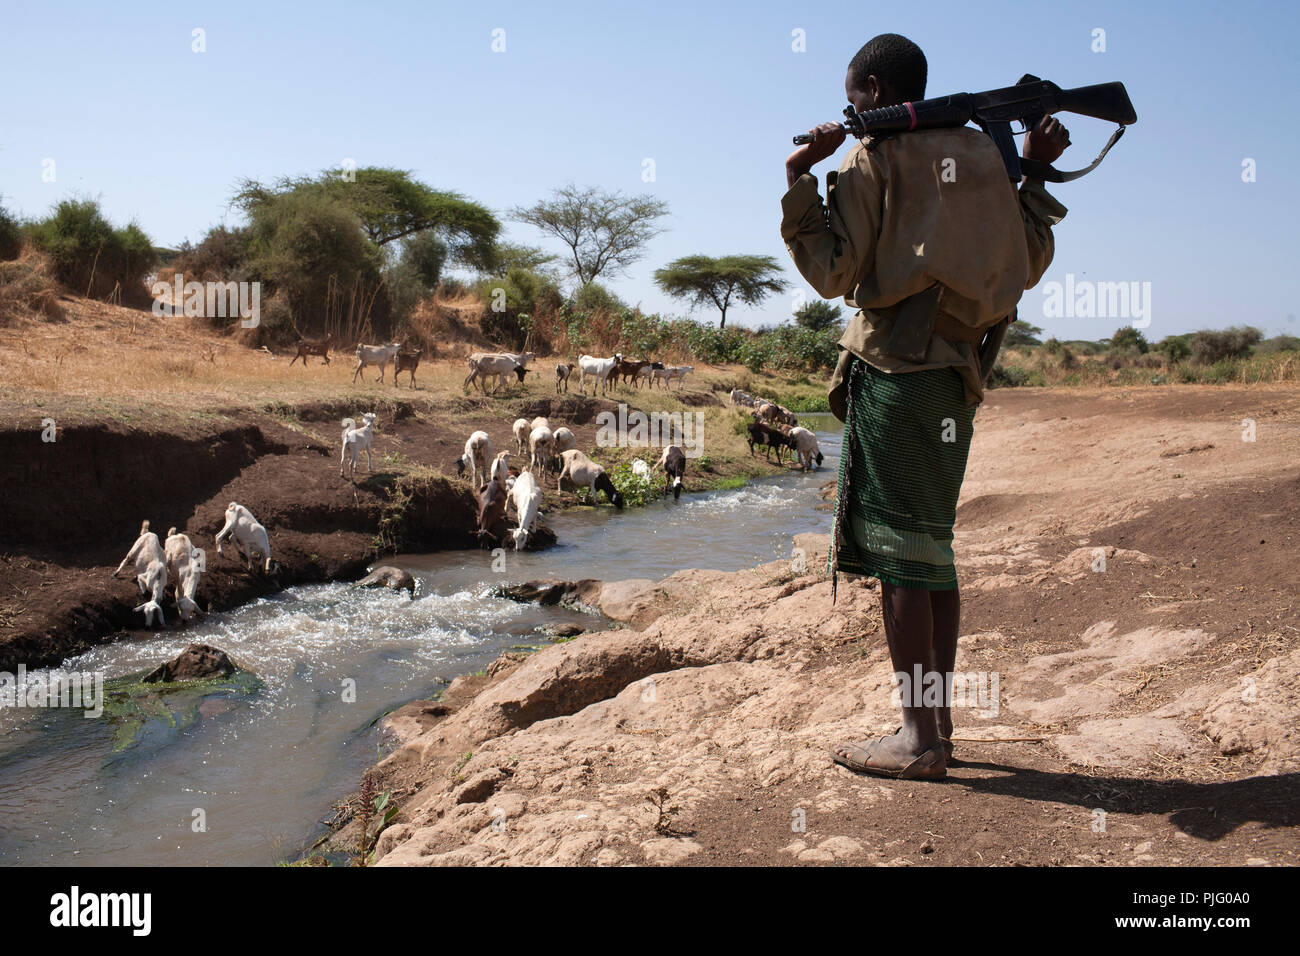 An armed Turkana young man watches over is herd of goats drinking by a river near Isiolo, northern Kenya, March 28, 2012. Stock Photo